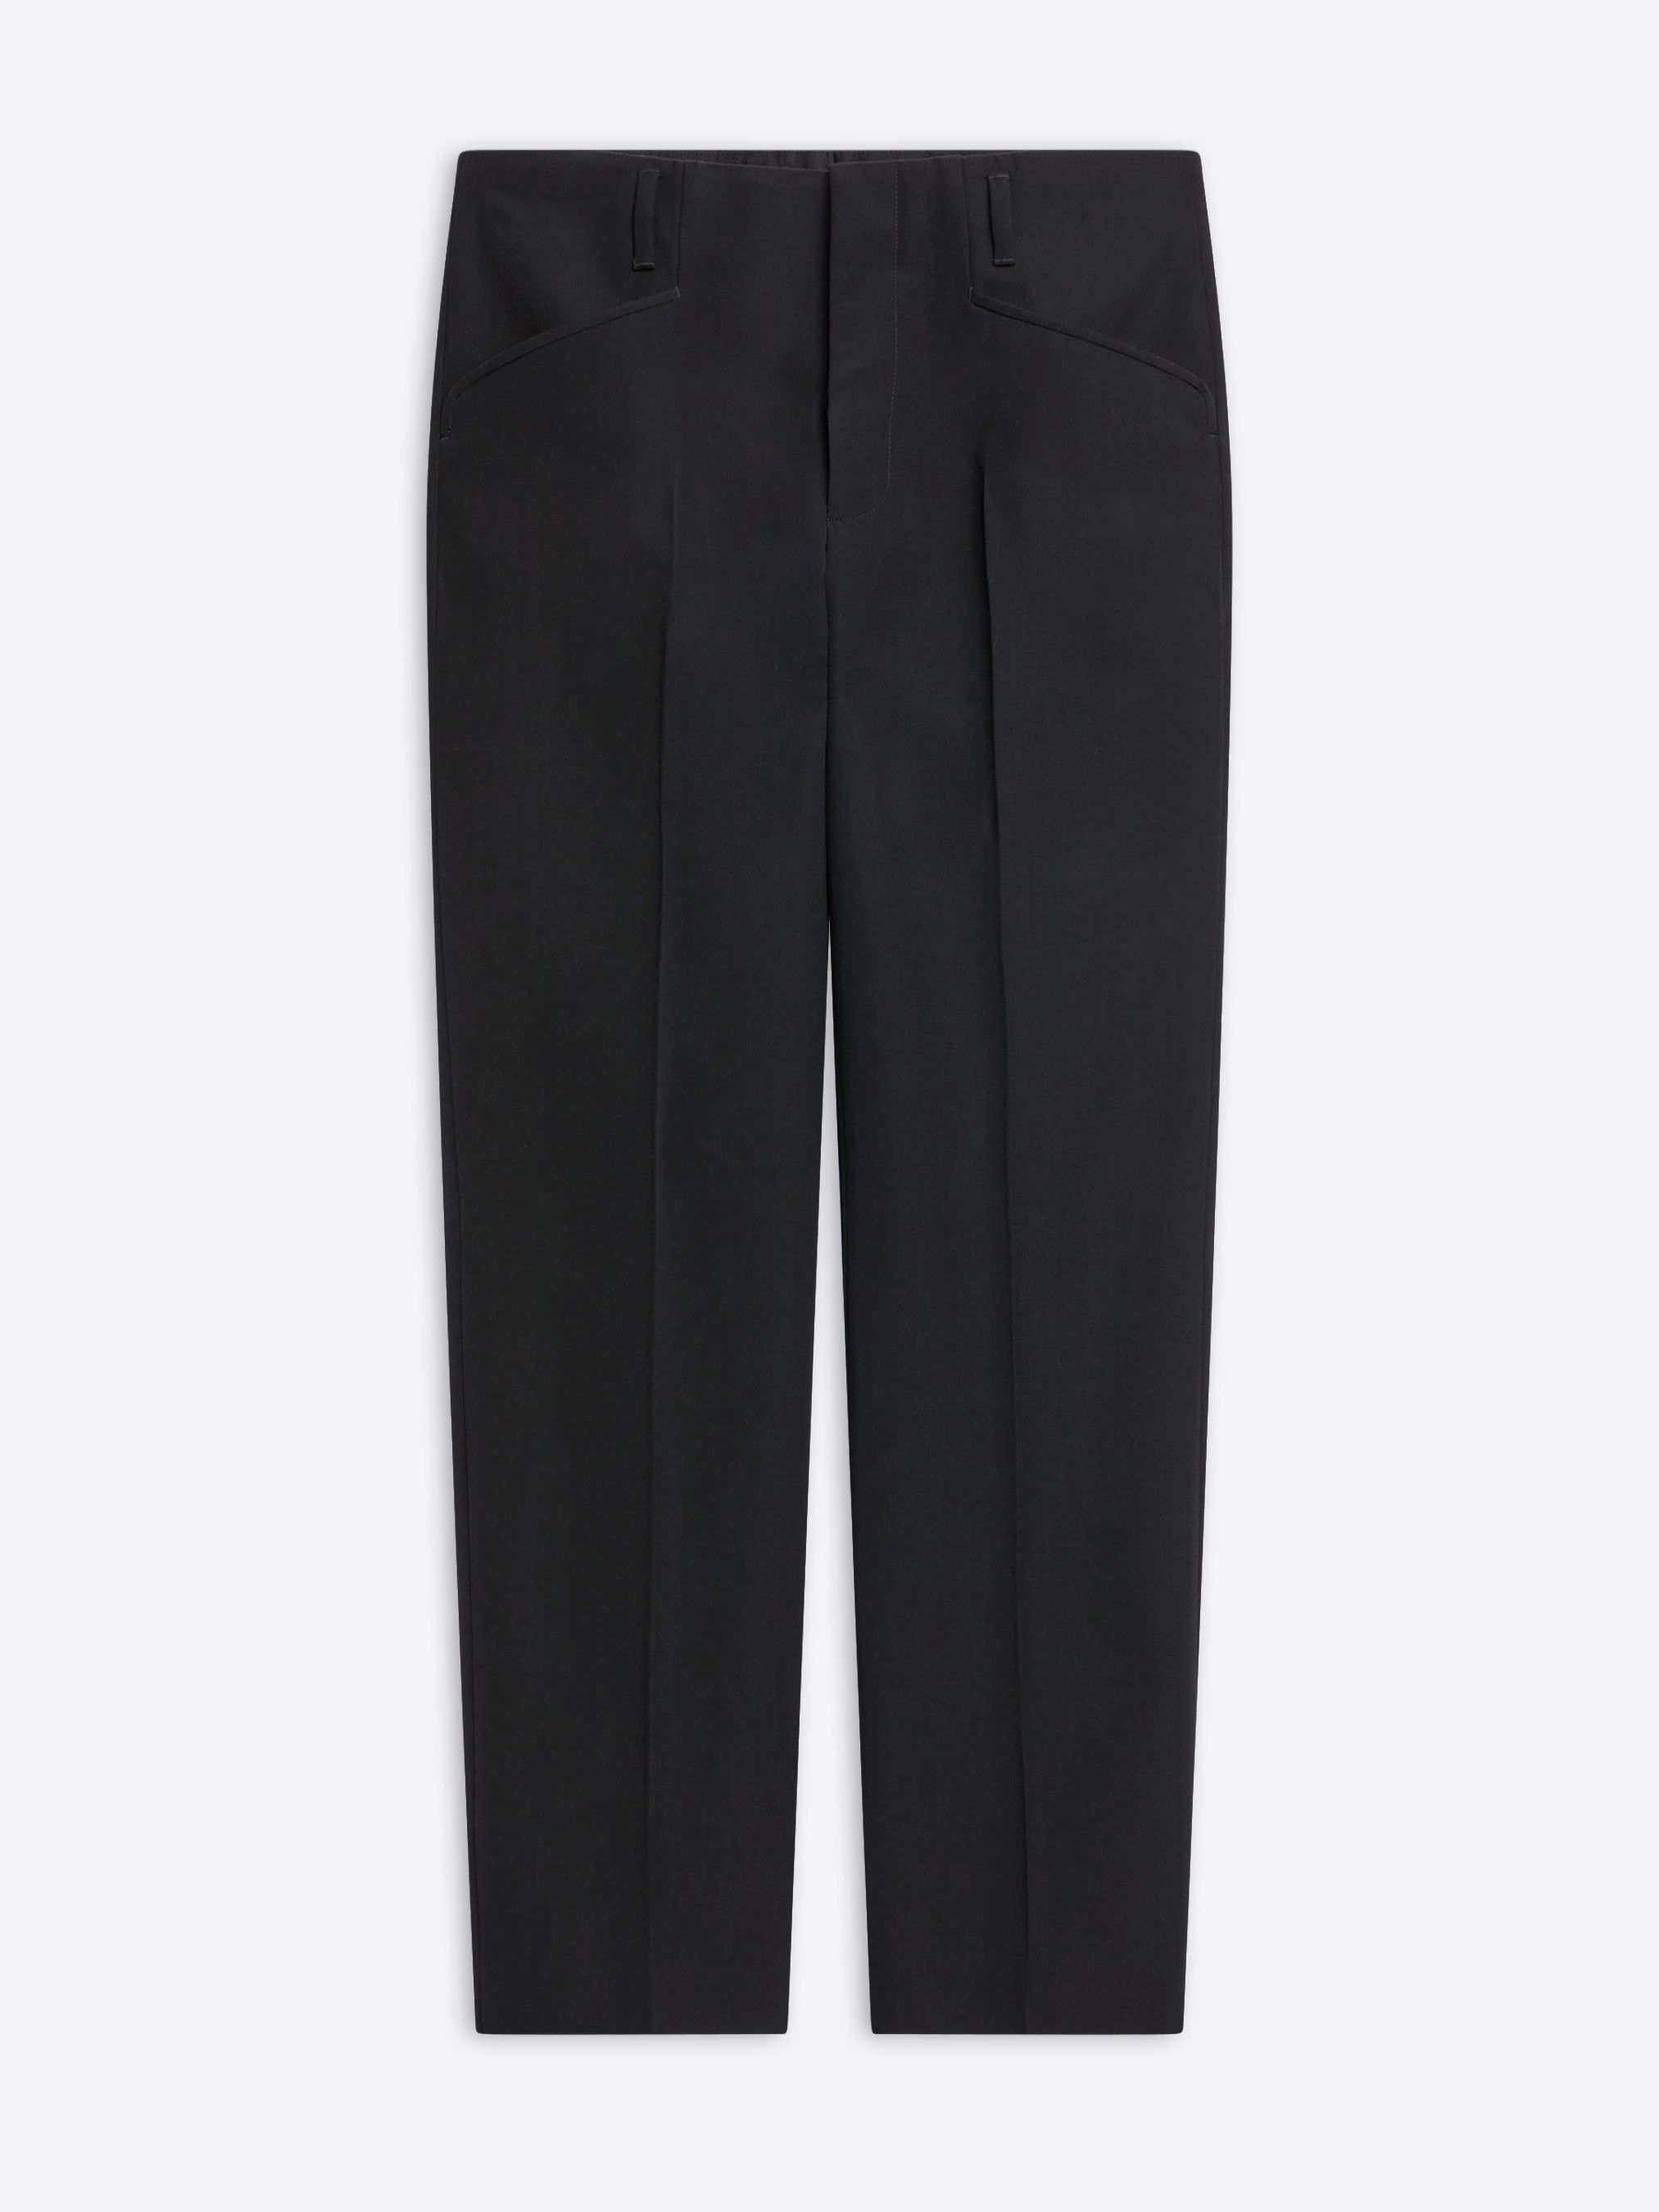 FITTED WOOL PANTS - 1